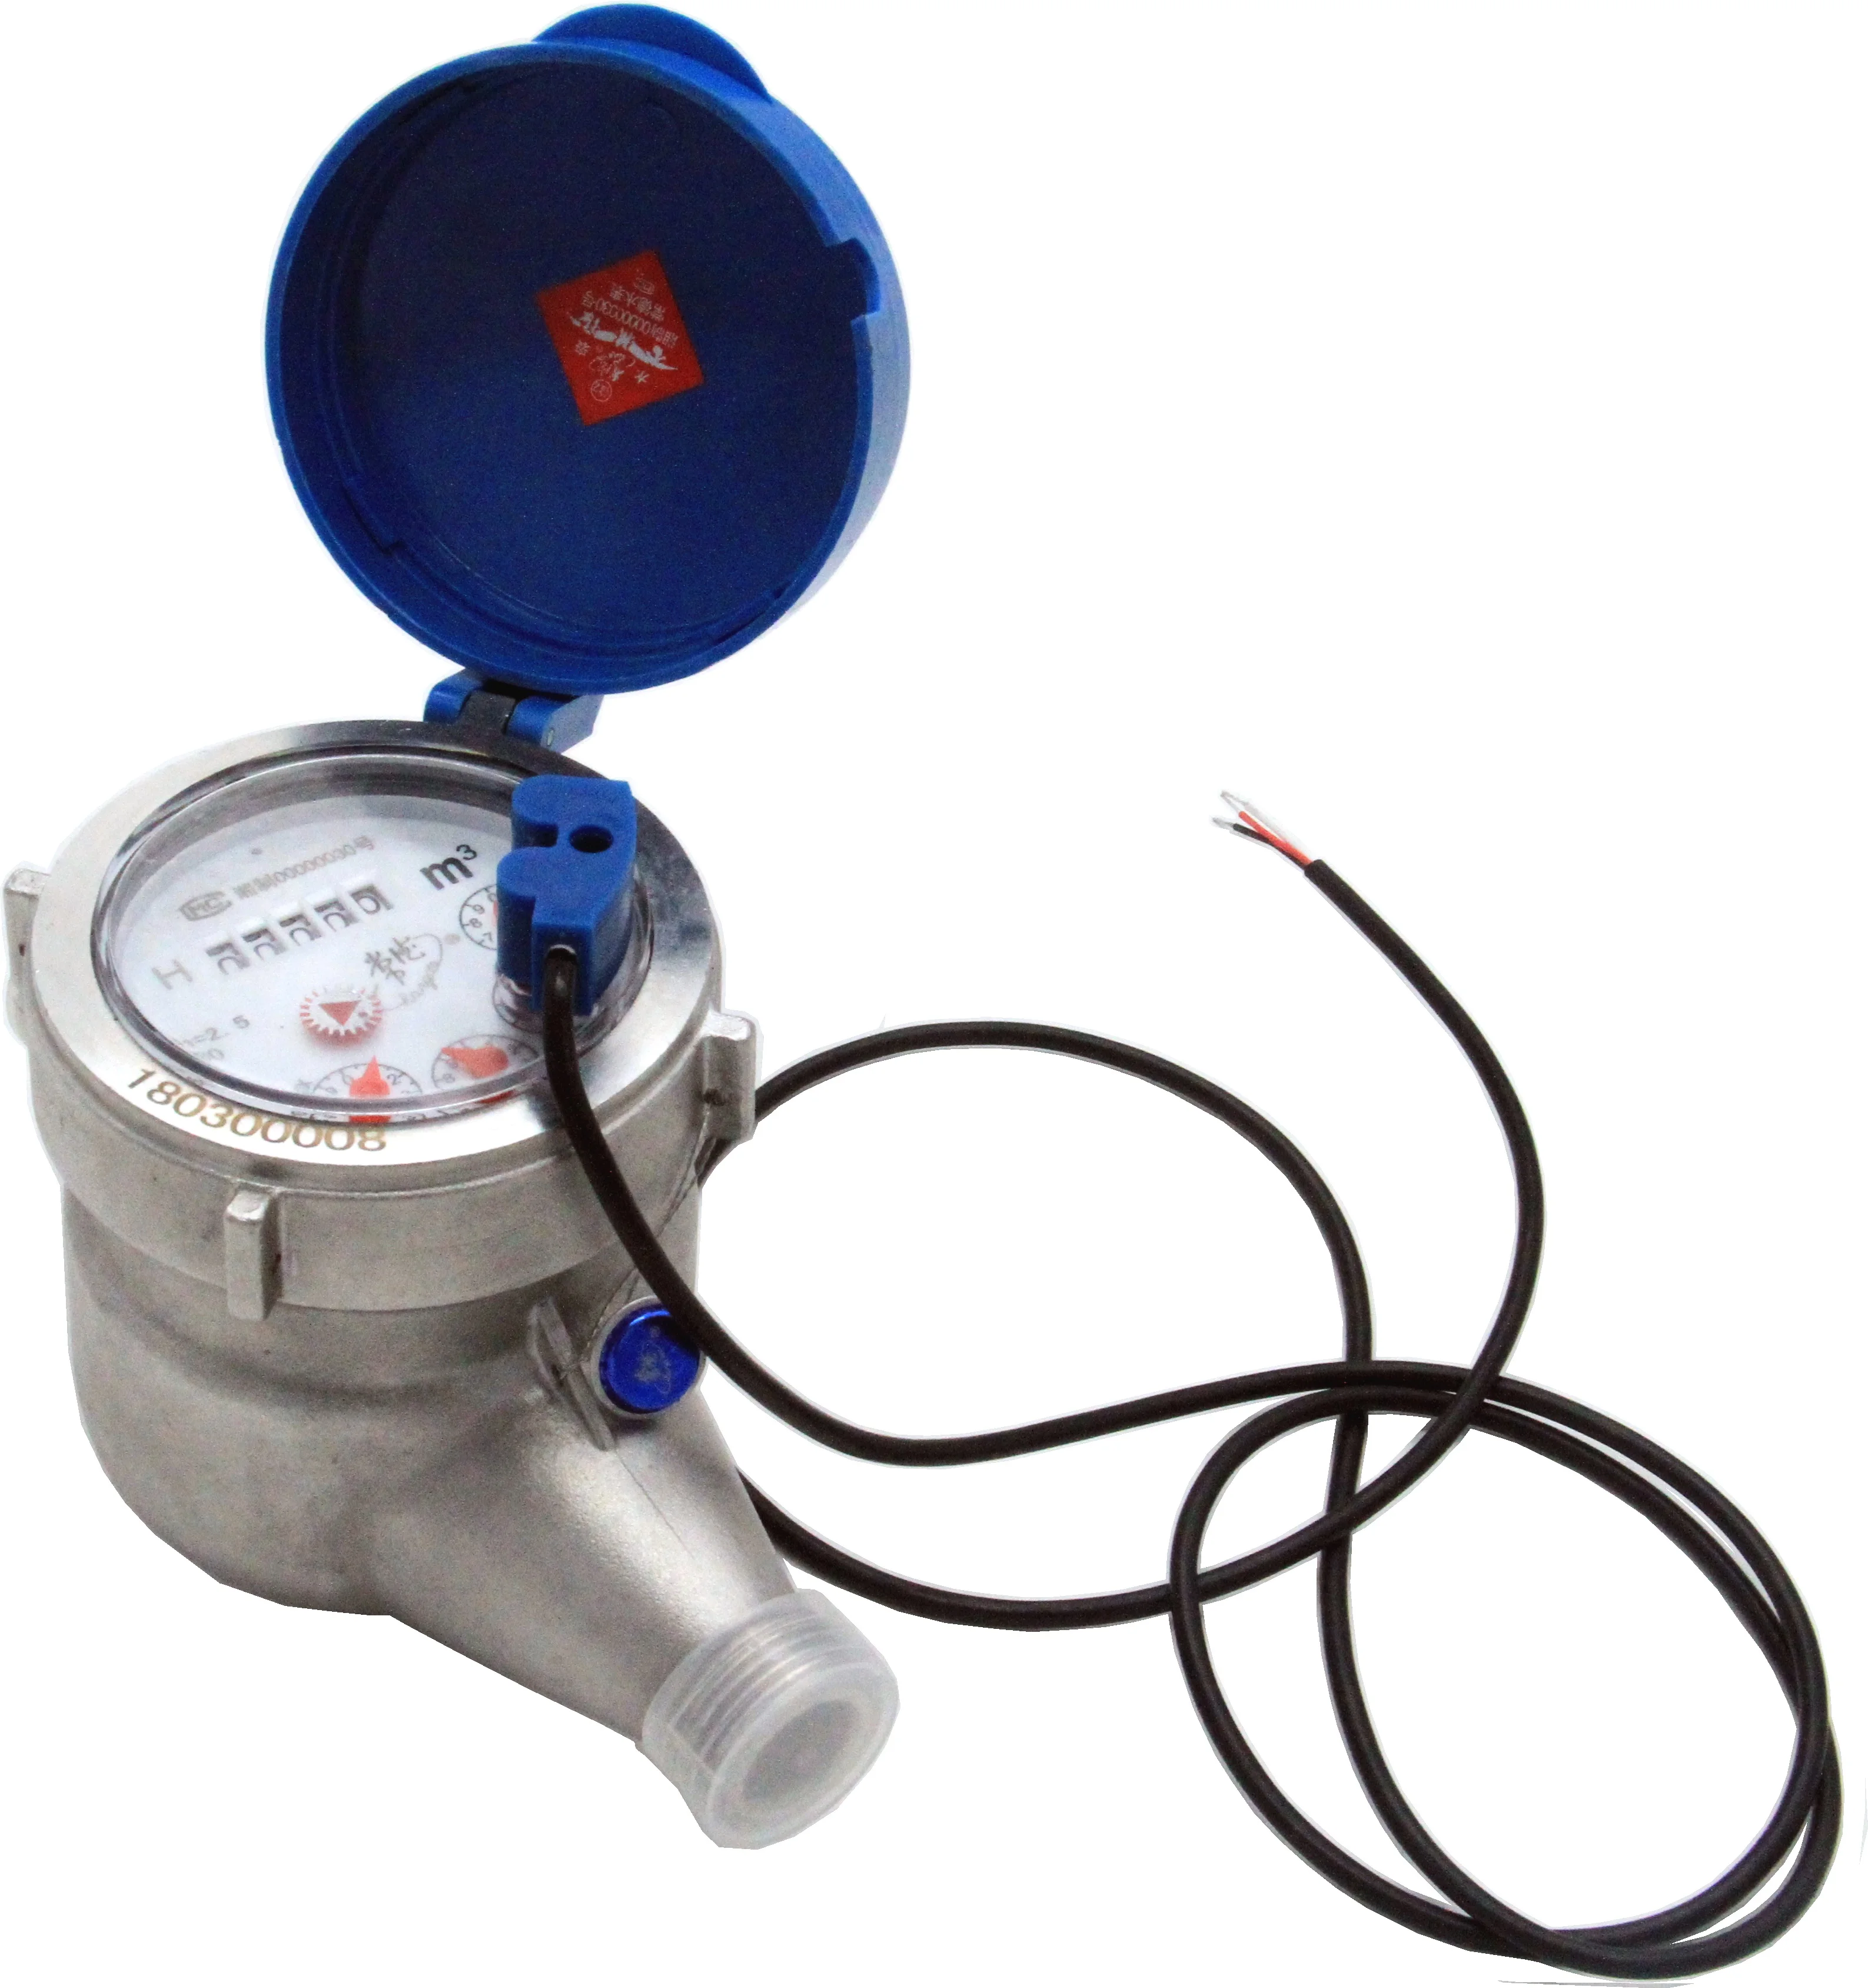 Rotary Vane Wheel dry dial or wet dial Multi- jet Pulse output transmission with OKI reed switch 10 litre/pulse water meter